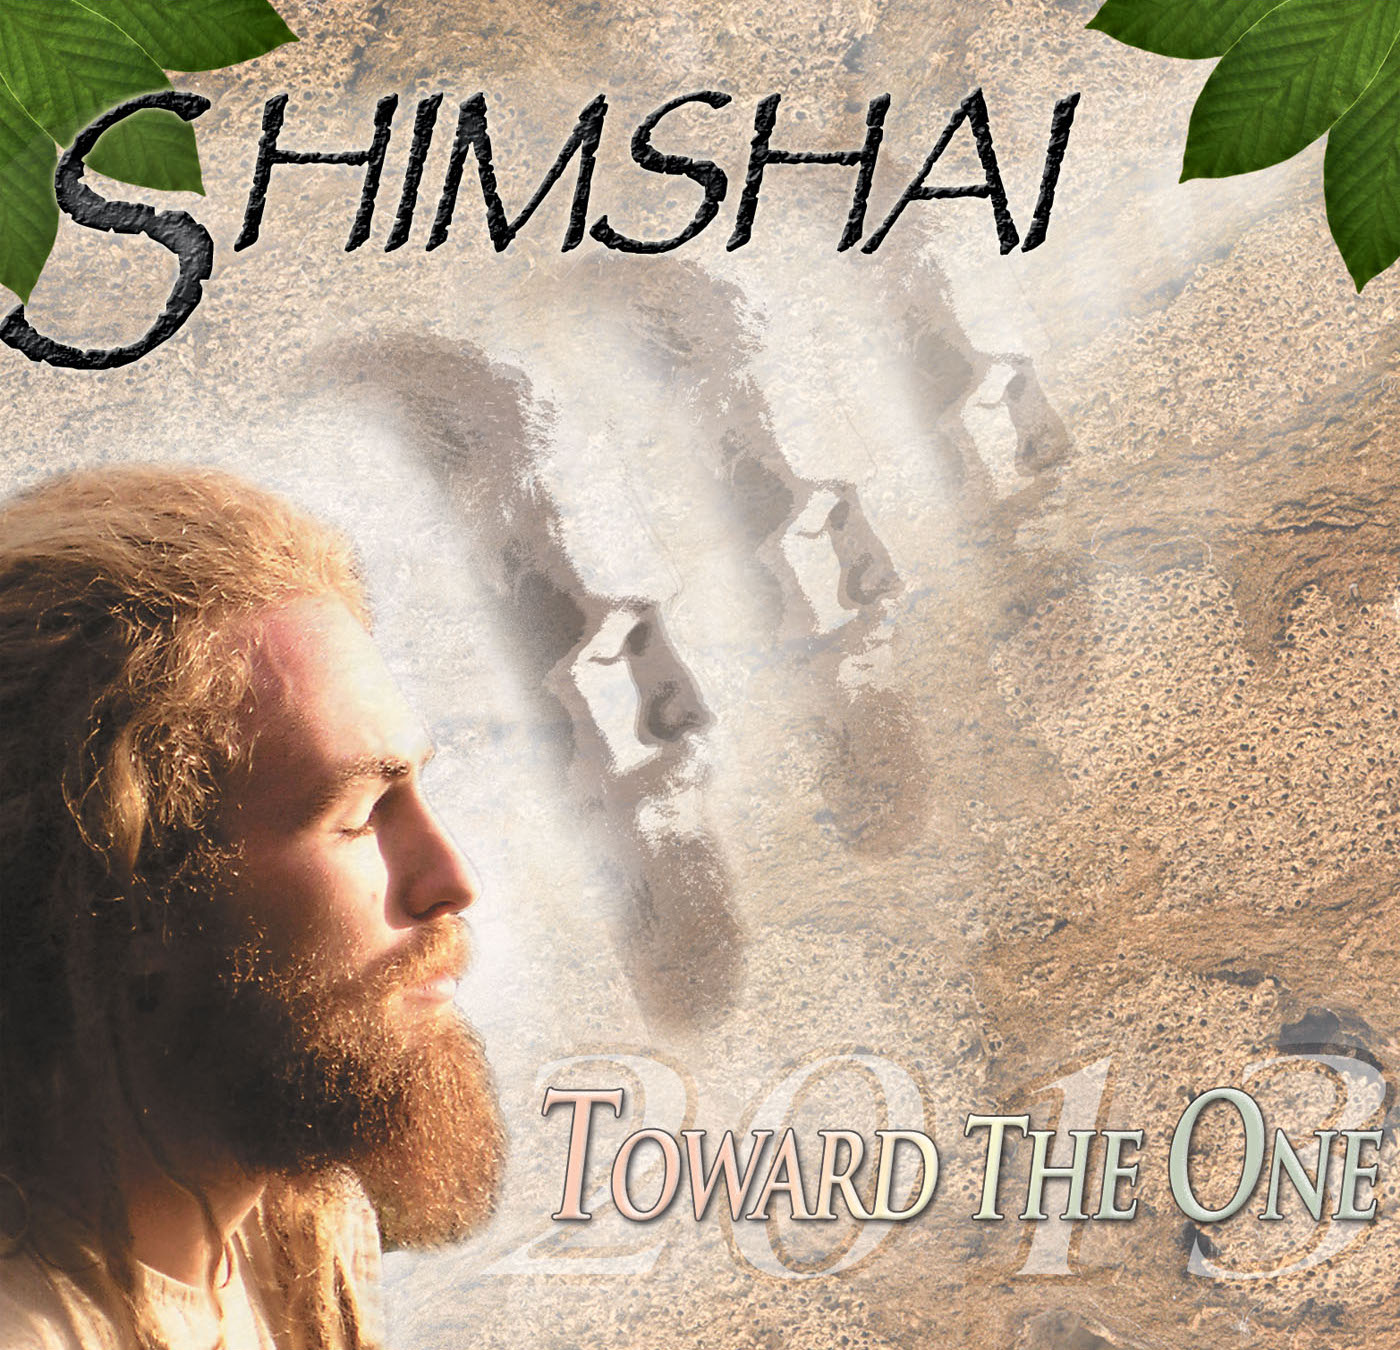 Shimshai’s all original spiritual pop and reggae flavors shine through with Toward the One featuring classics like Be Here Now, Move Mountains and I Sense Your Presence. 